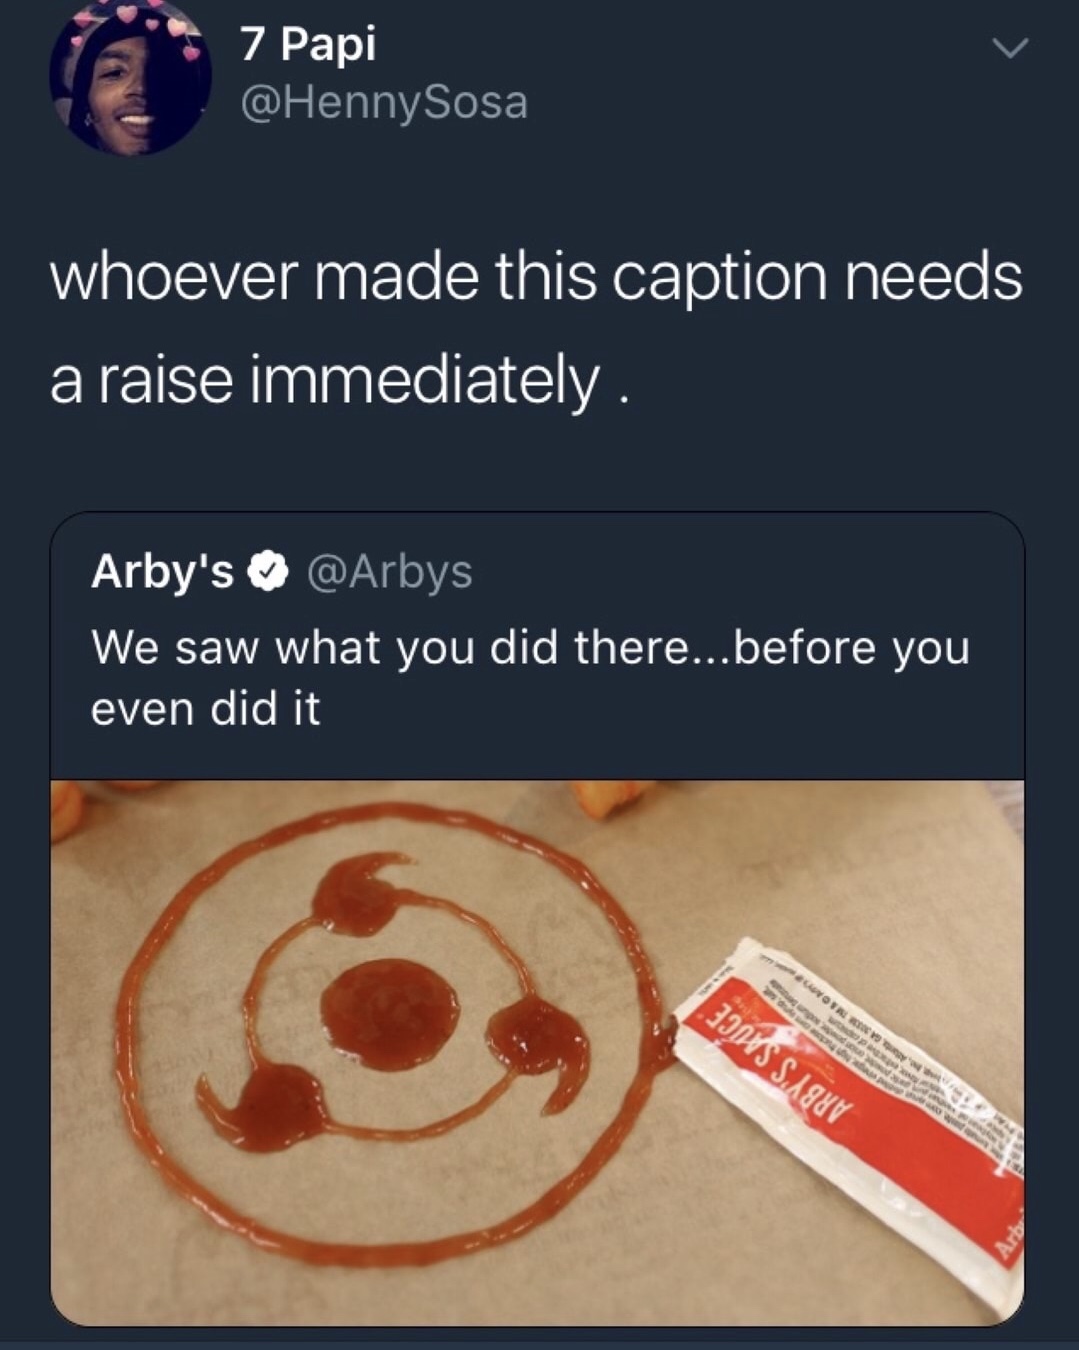 arbys sharingan - Cena za Papiny sos 7 Papi Sosa whoever made this caption needs a raise immediately. Arby's We saw what you did there...before you even did it Vota Jins Sauv V